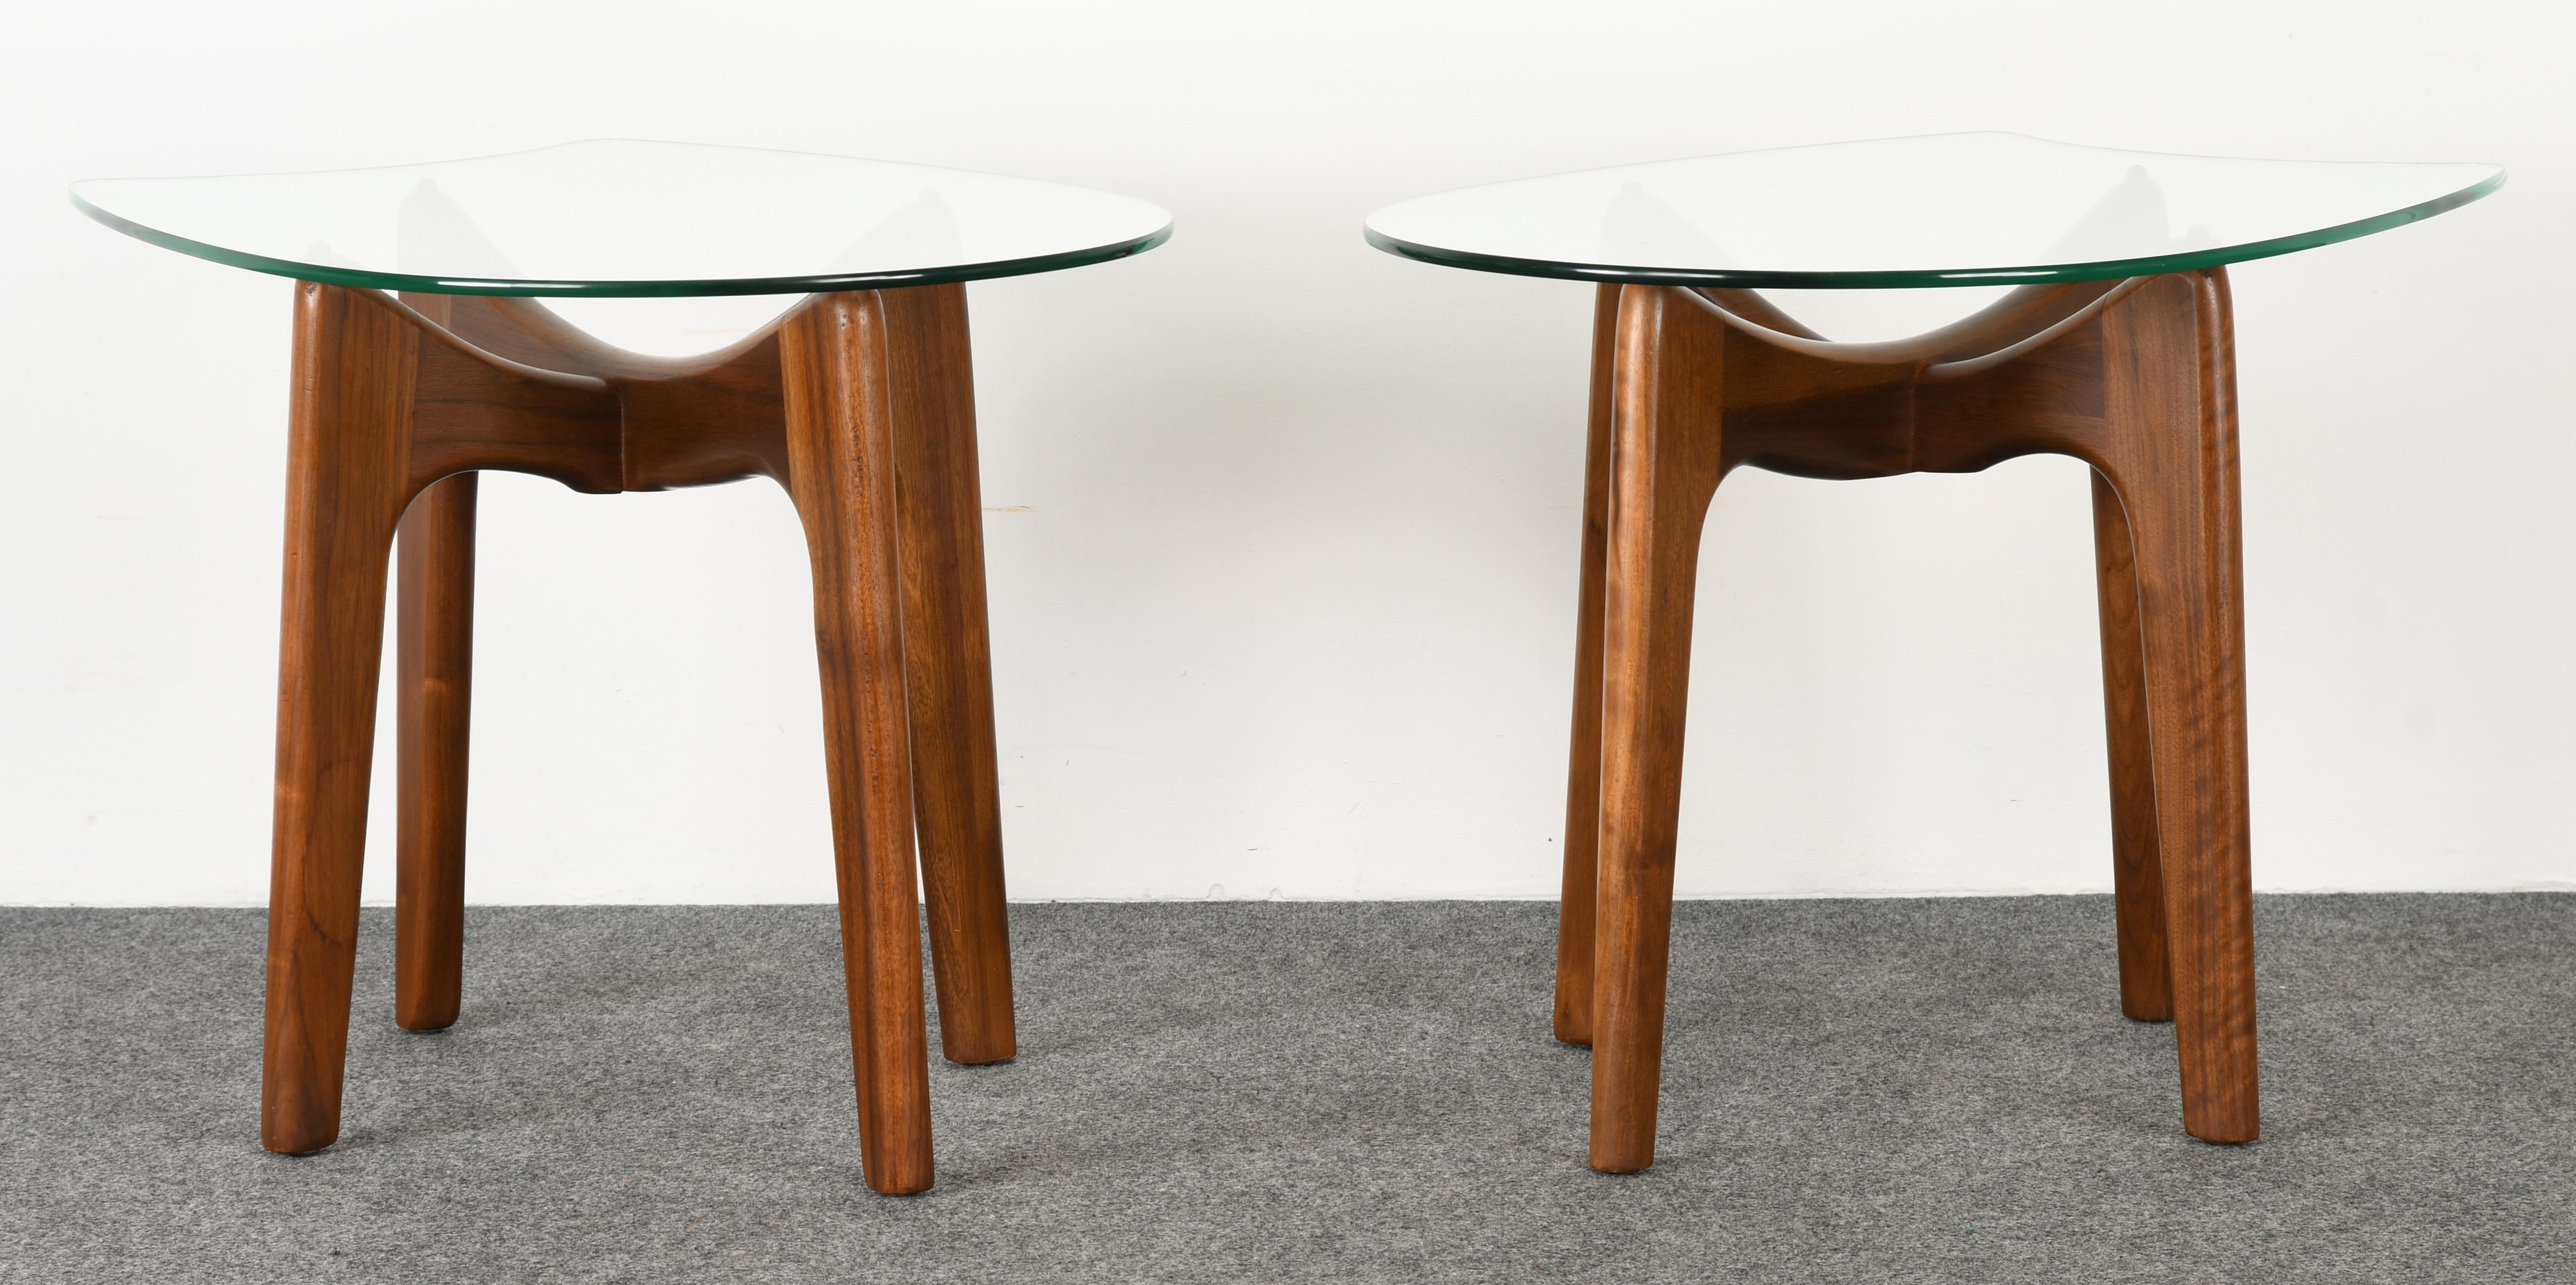 An iconic Mid-Century Modern pair of Adrian Pearsall 